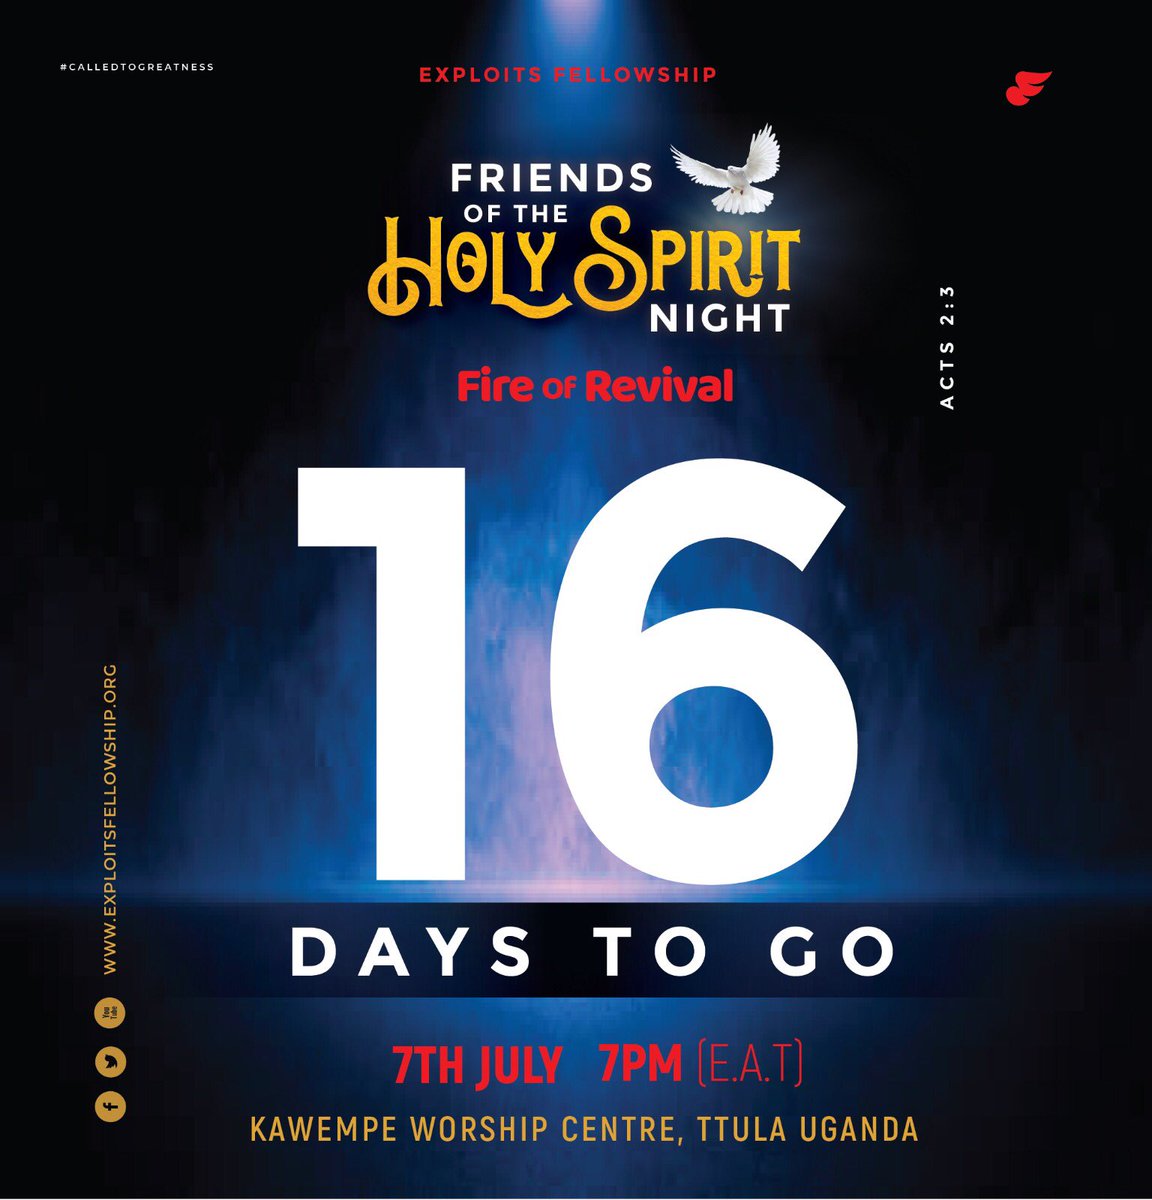 Good morning #FriendsOfTheHolySpiritNight we have 16days to go and make this happen. We invite each and everyone to attend and have an encounter with the Precious Holy Spirit.
#ExploitsFellowship